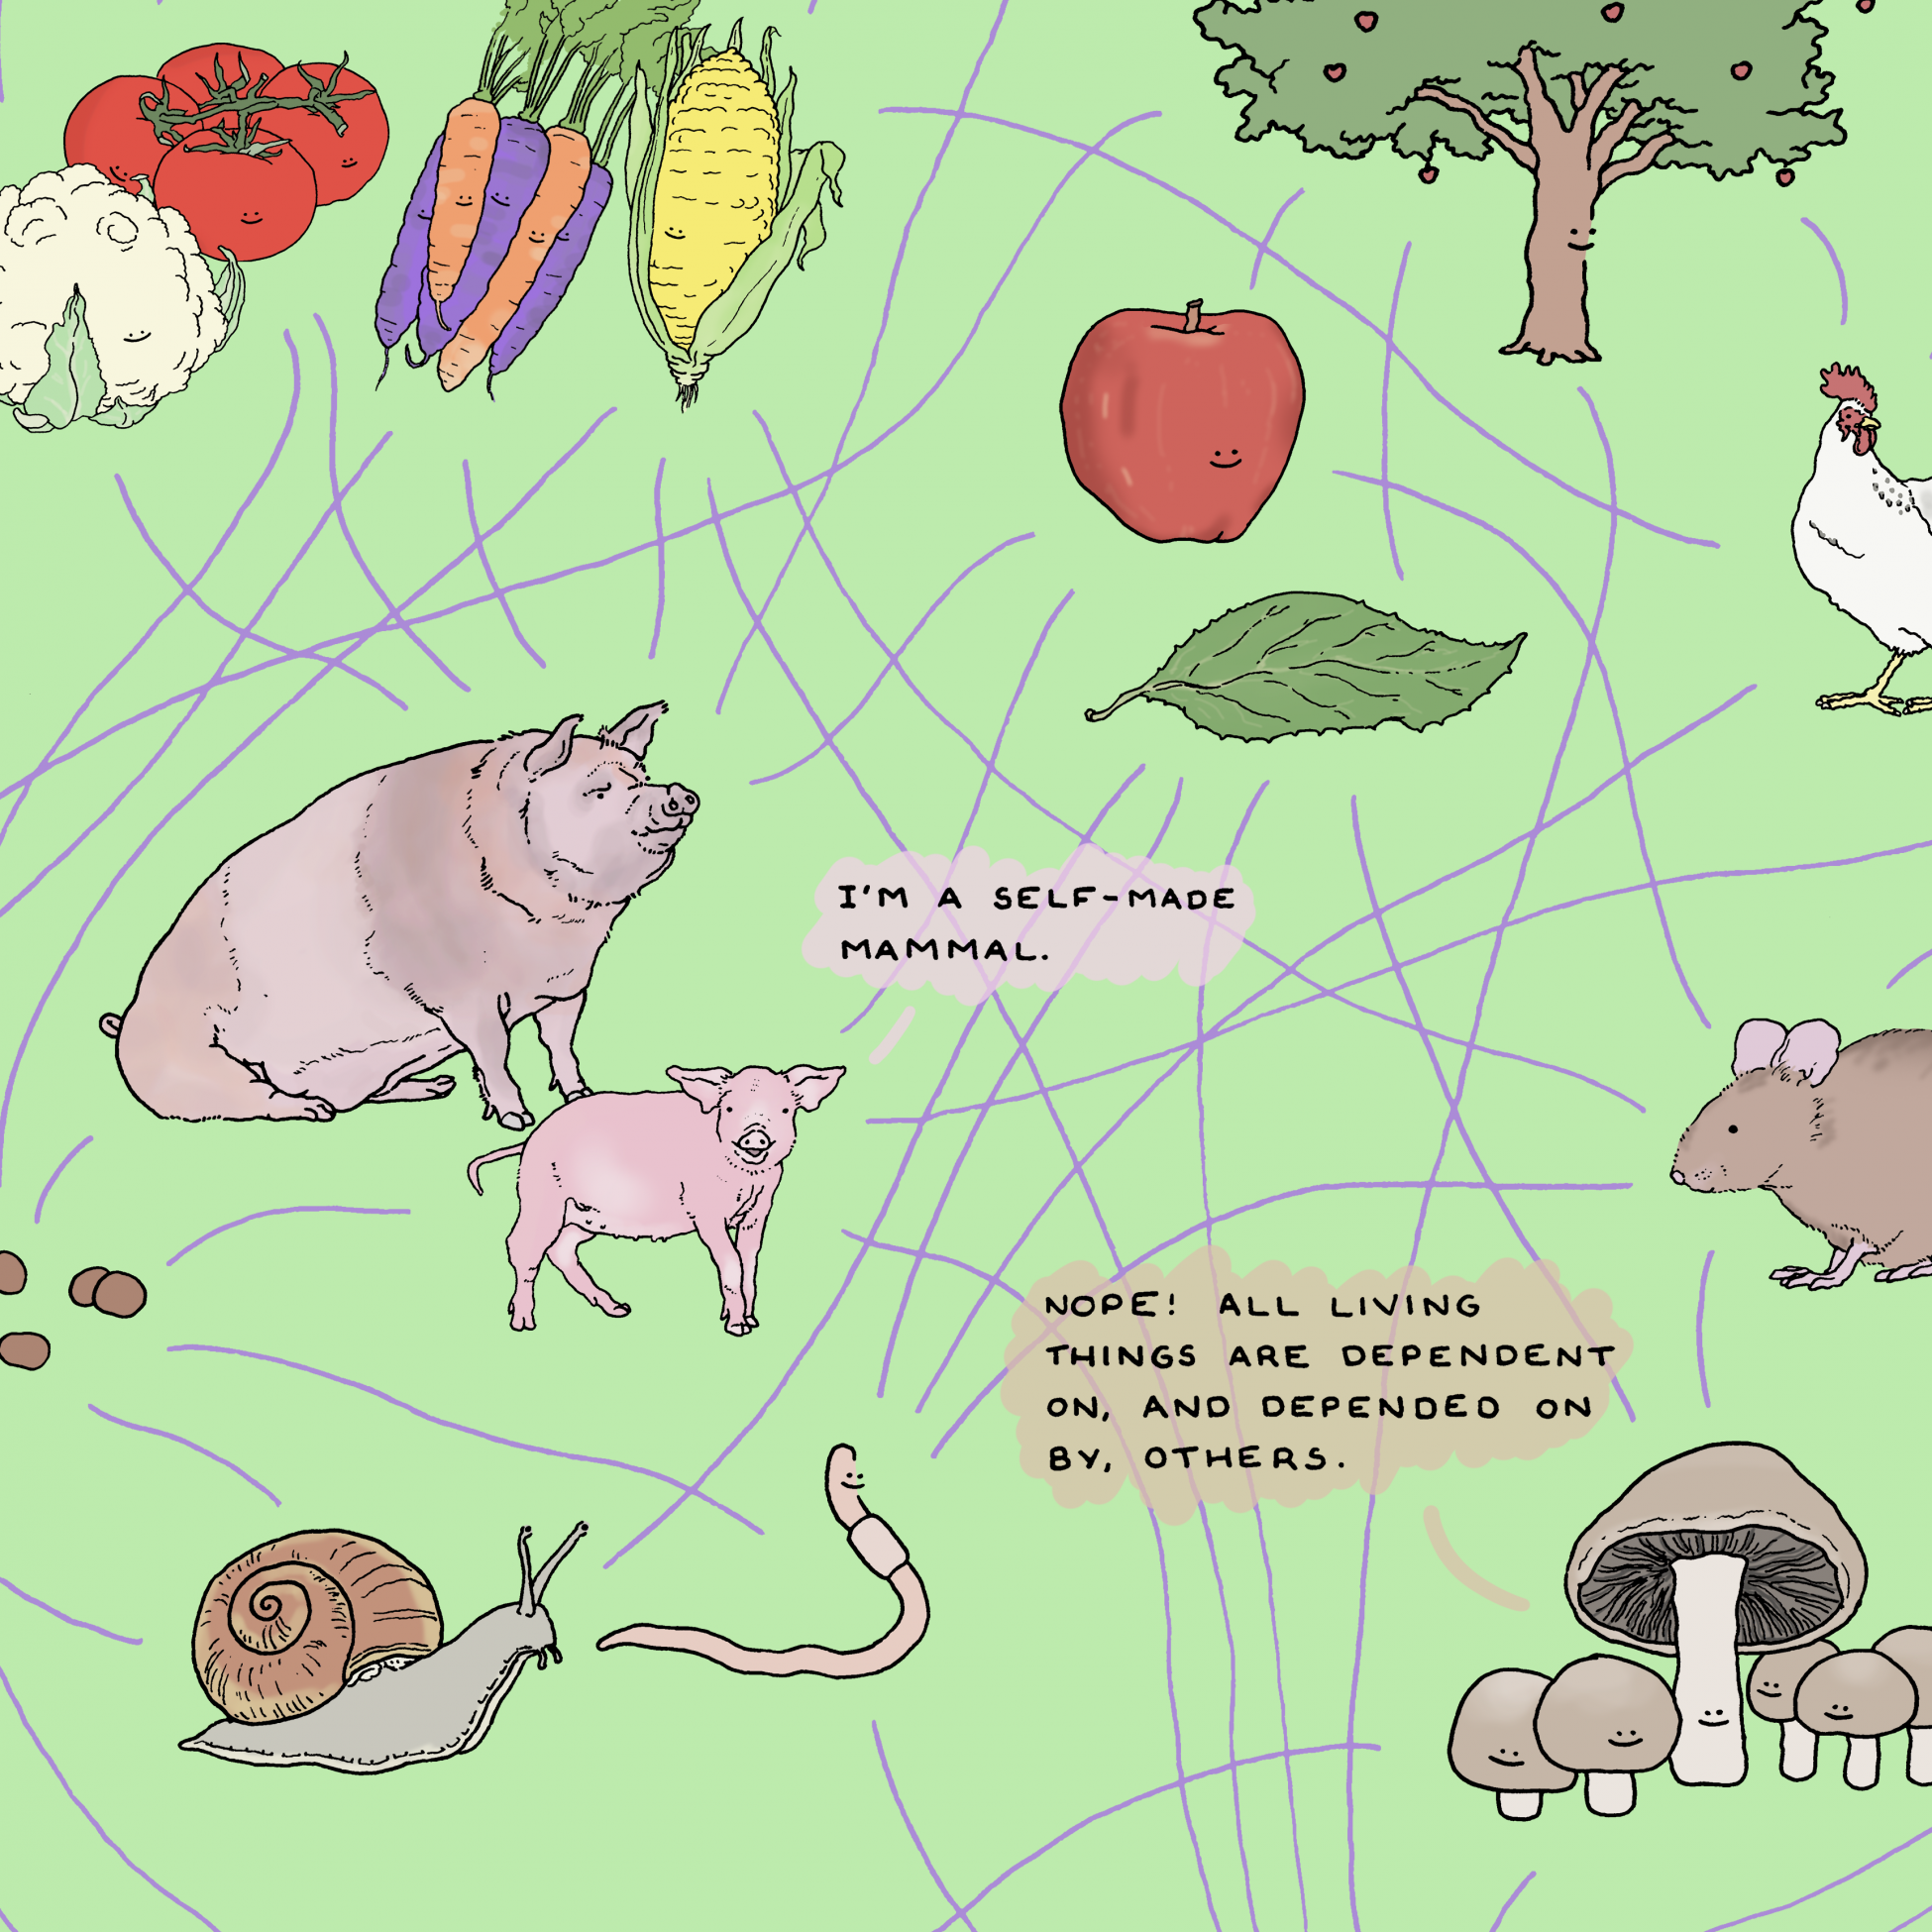 Part of a digital artwork showing illustrations of anthropomorphised fruits and vegetables and animals. There are dozens of criss-crossing lines drawn between all of the foods and animals, as well as lines disappearing off the edges of the image. A piglet has a speech bubble saying 